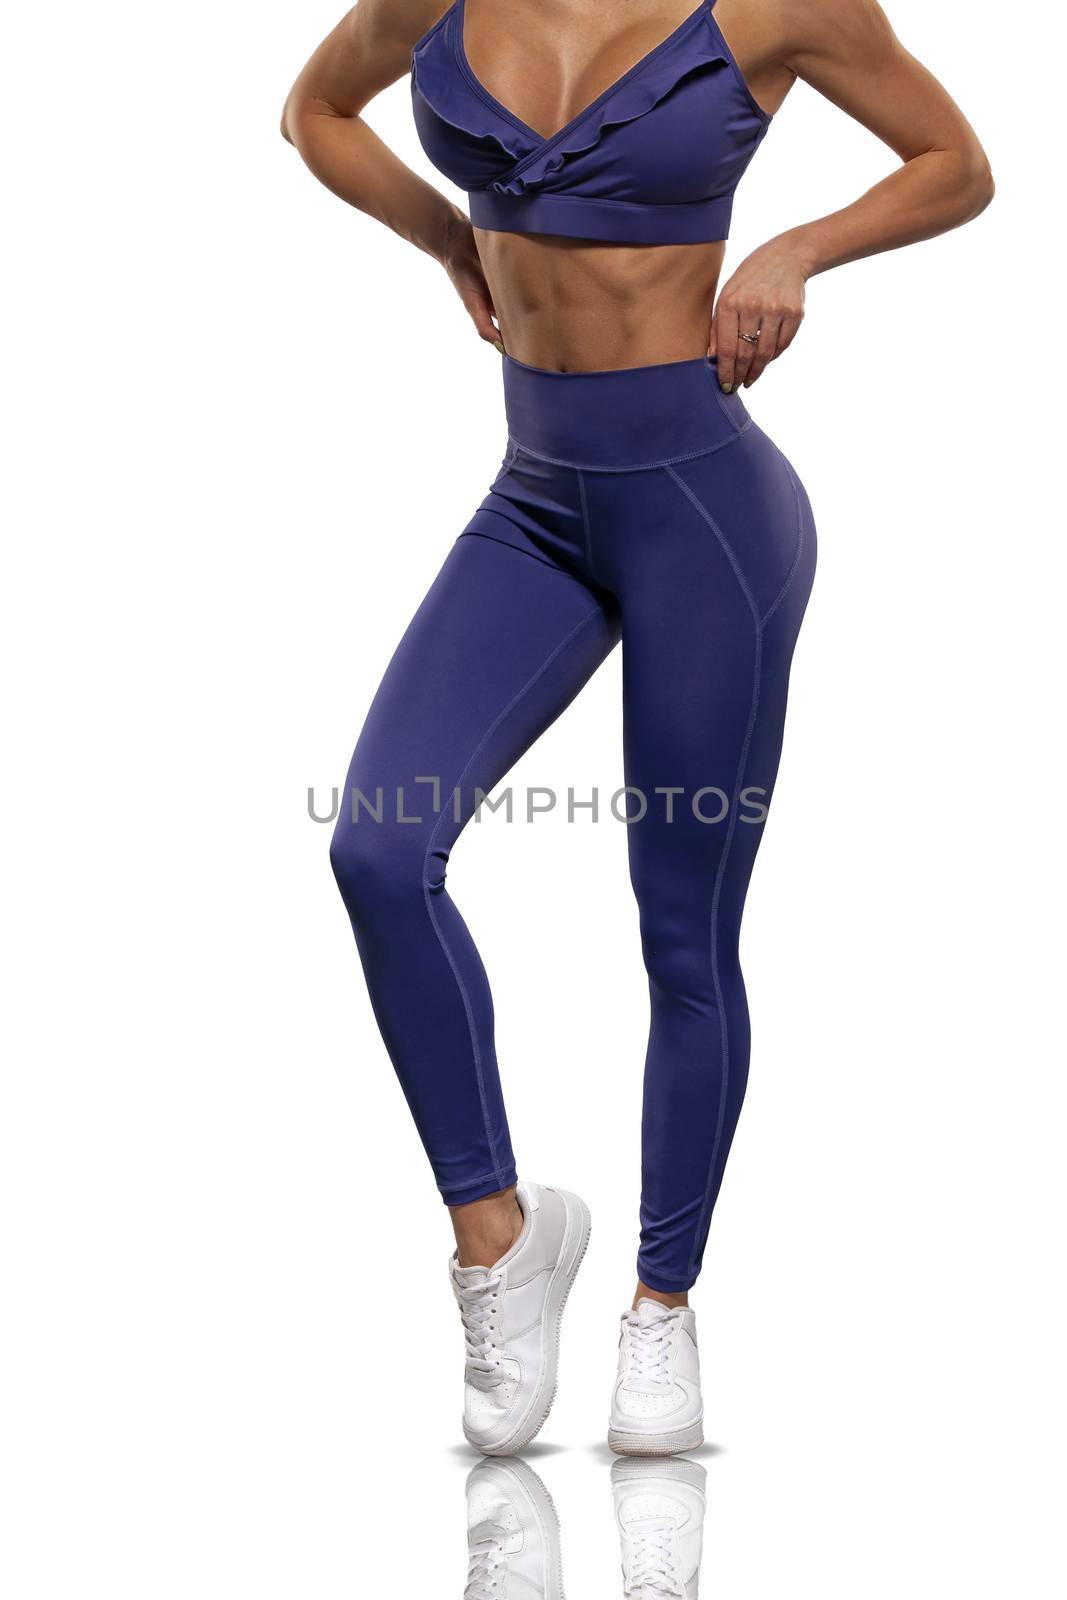 legs brunette girl in blue leggings and top on a white background